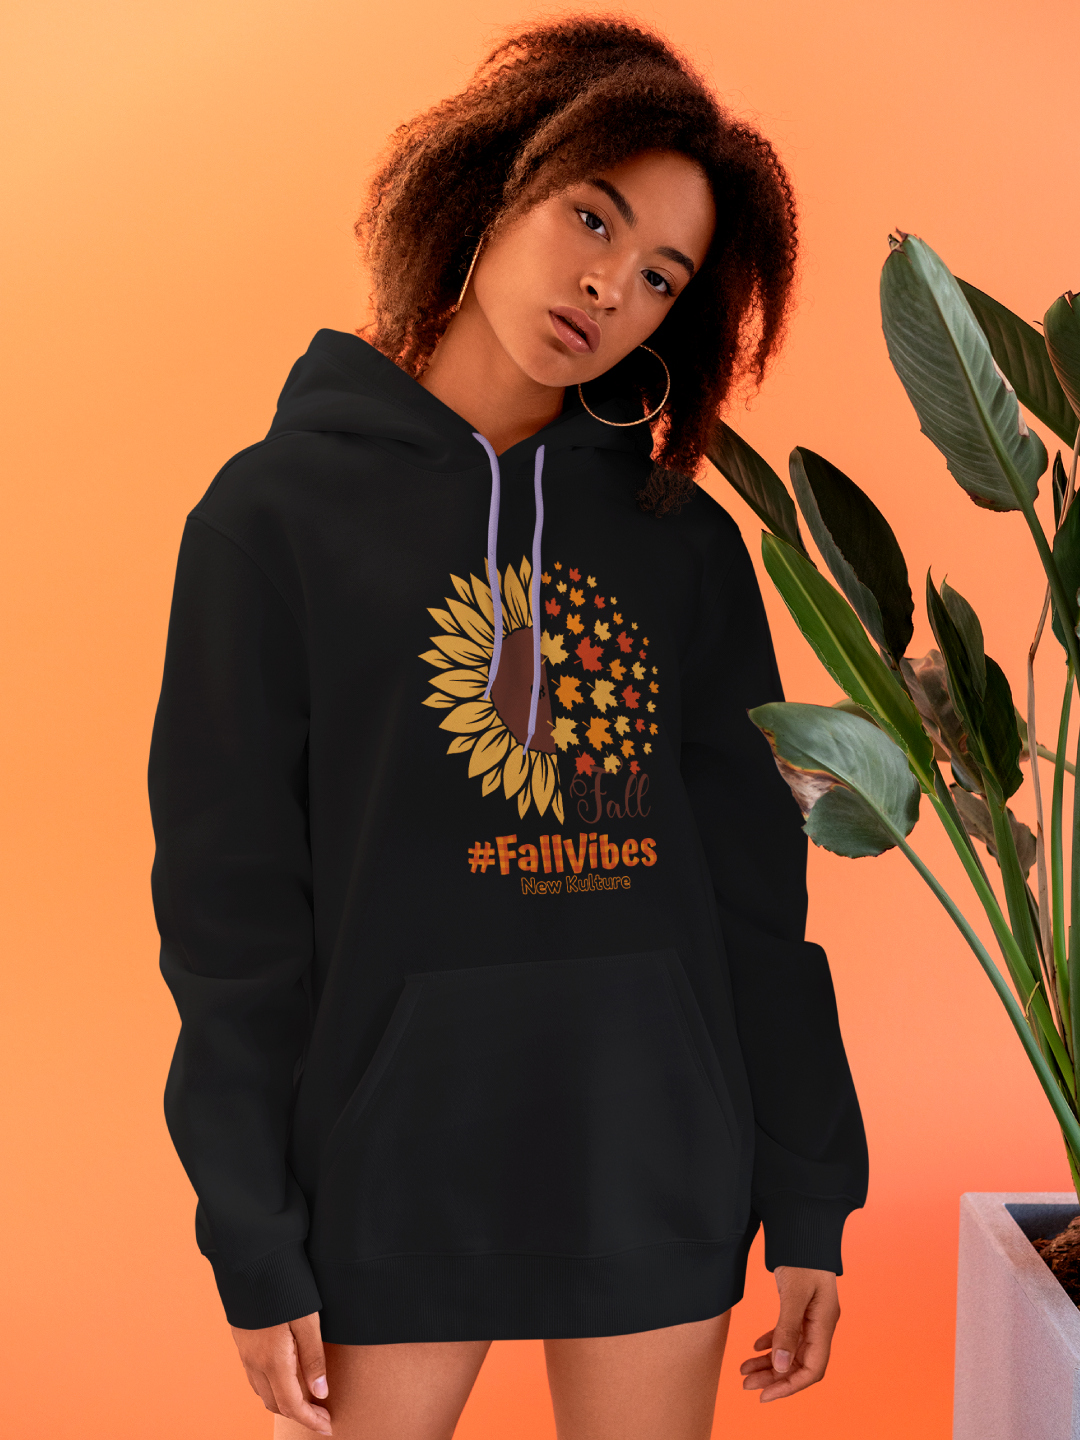 Women's Oversized Hoodie with Sunflower Design – Black Color Option